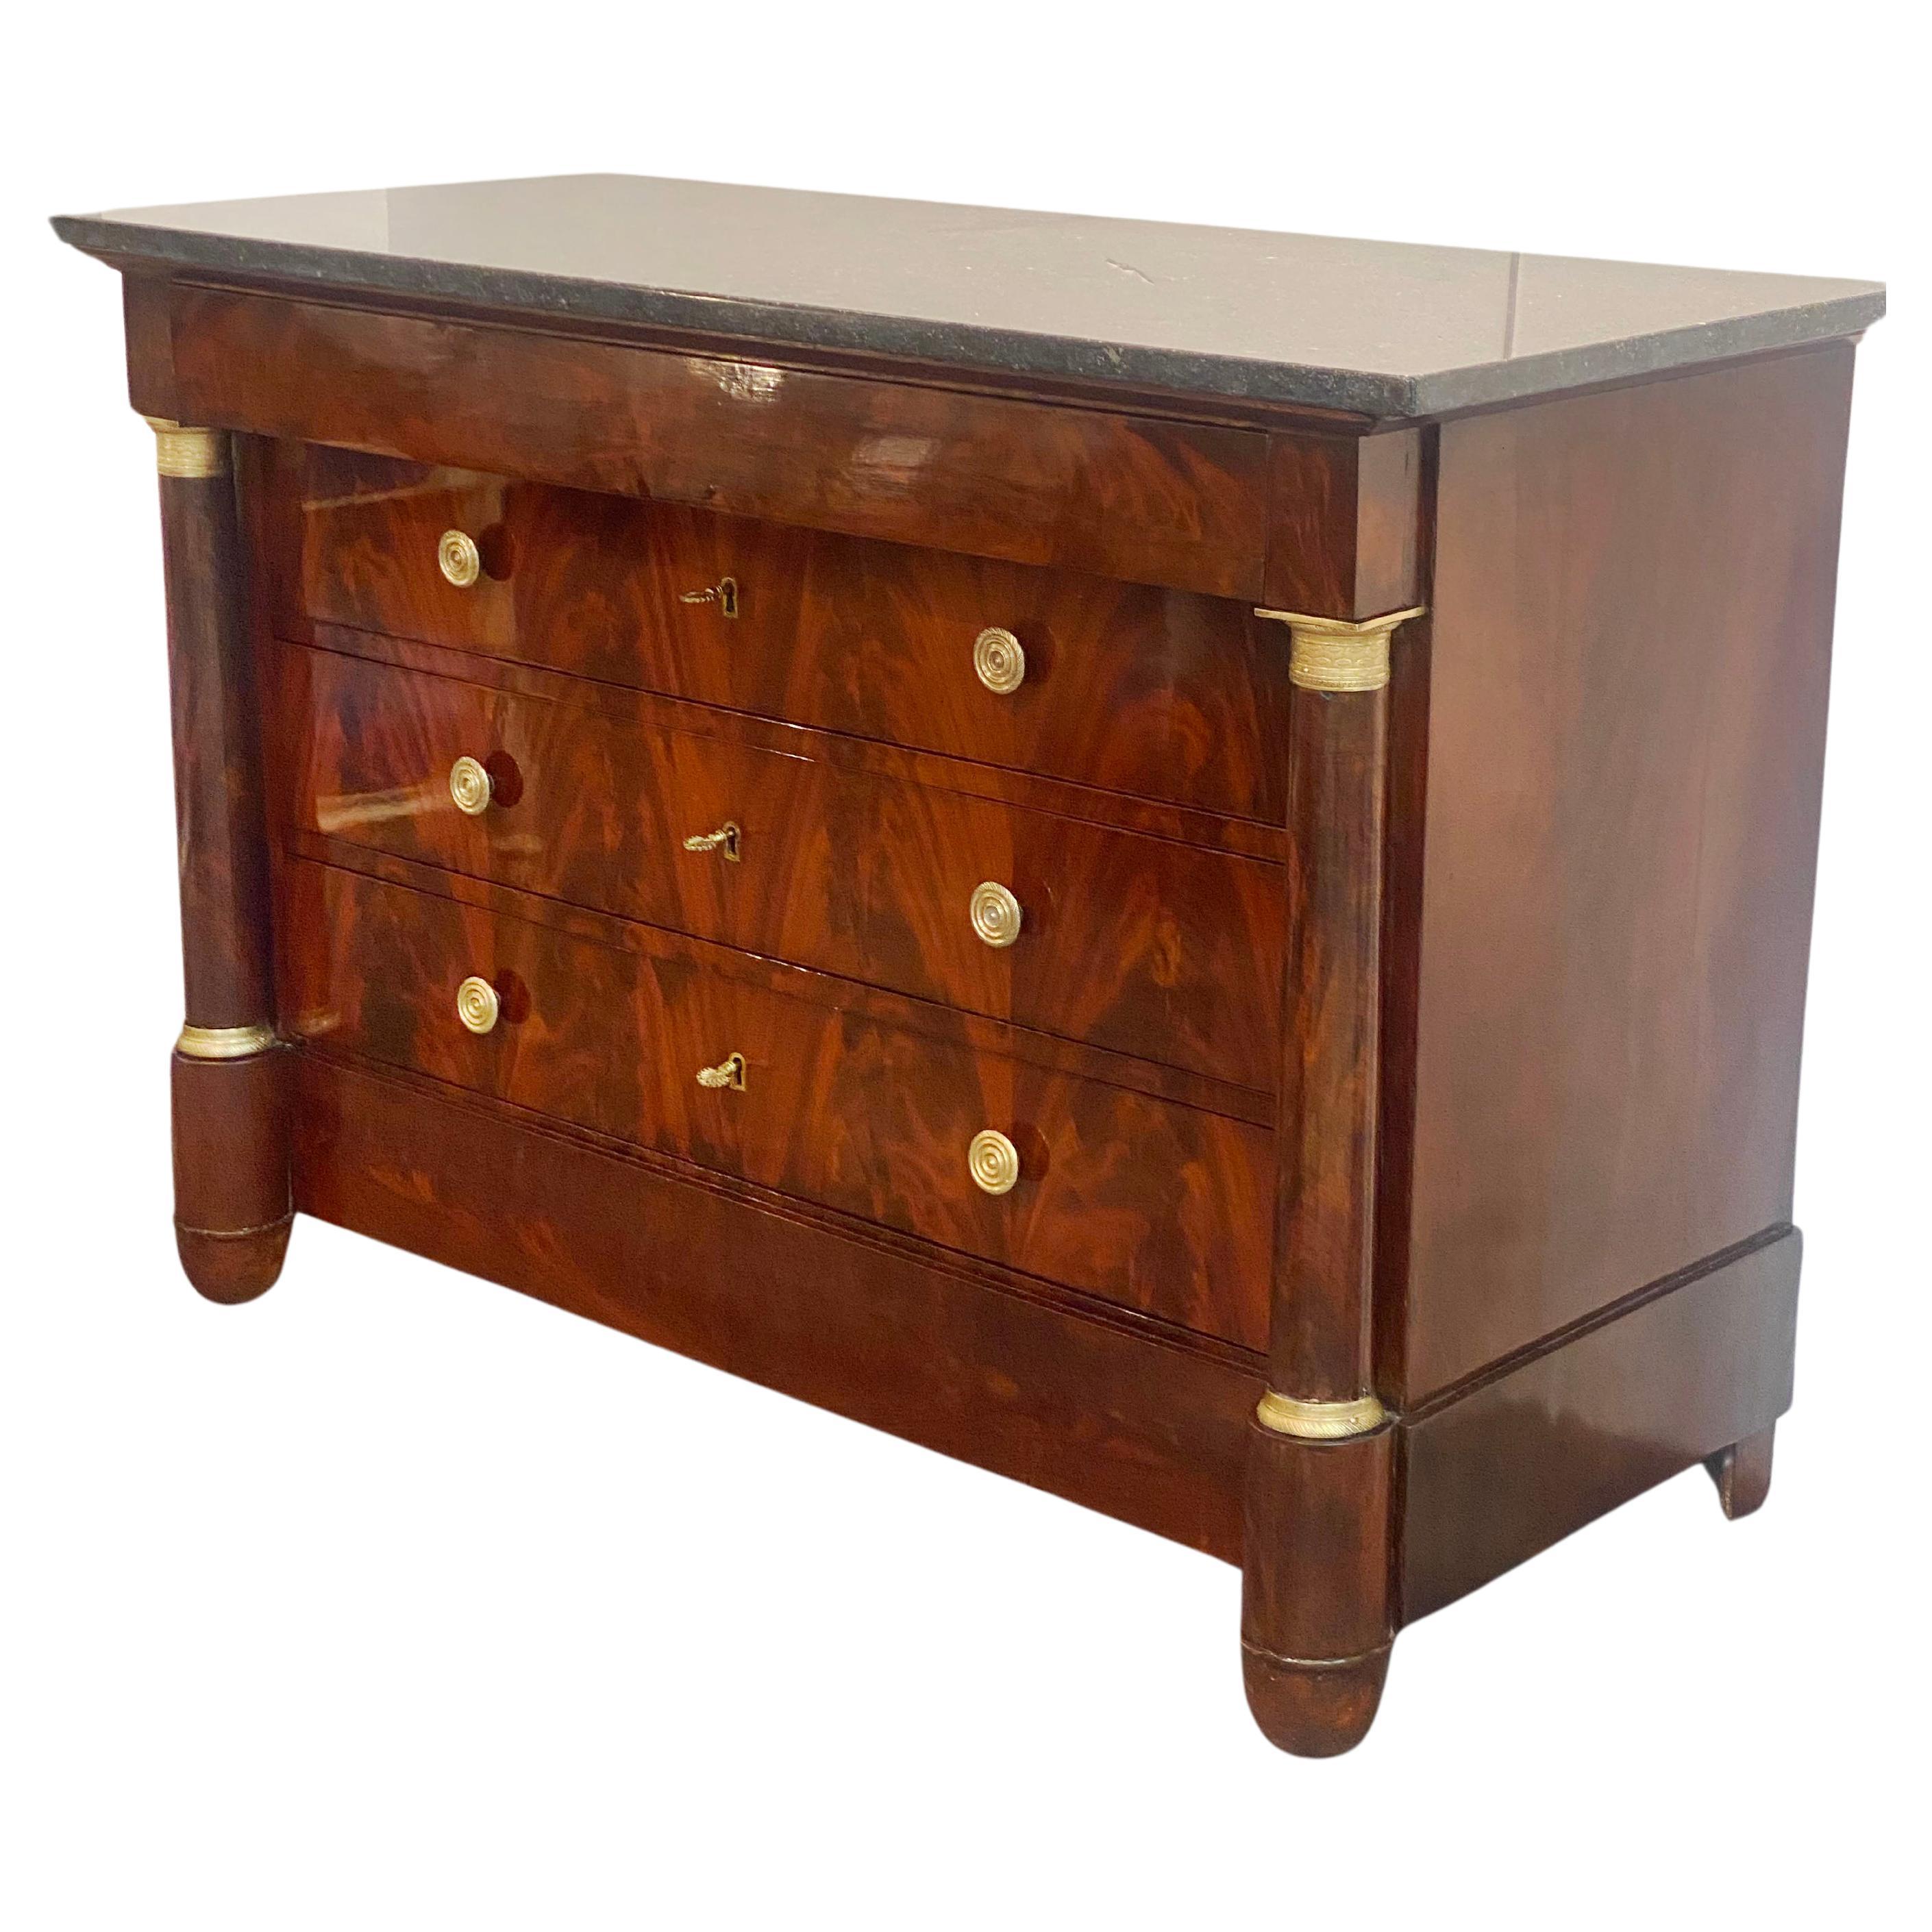 Chest of drawers - Empire period - Mahogany   For Sale